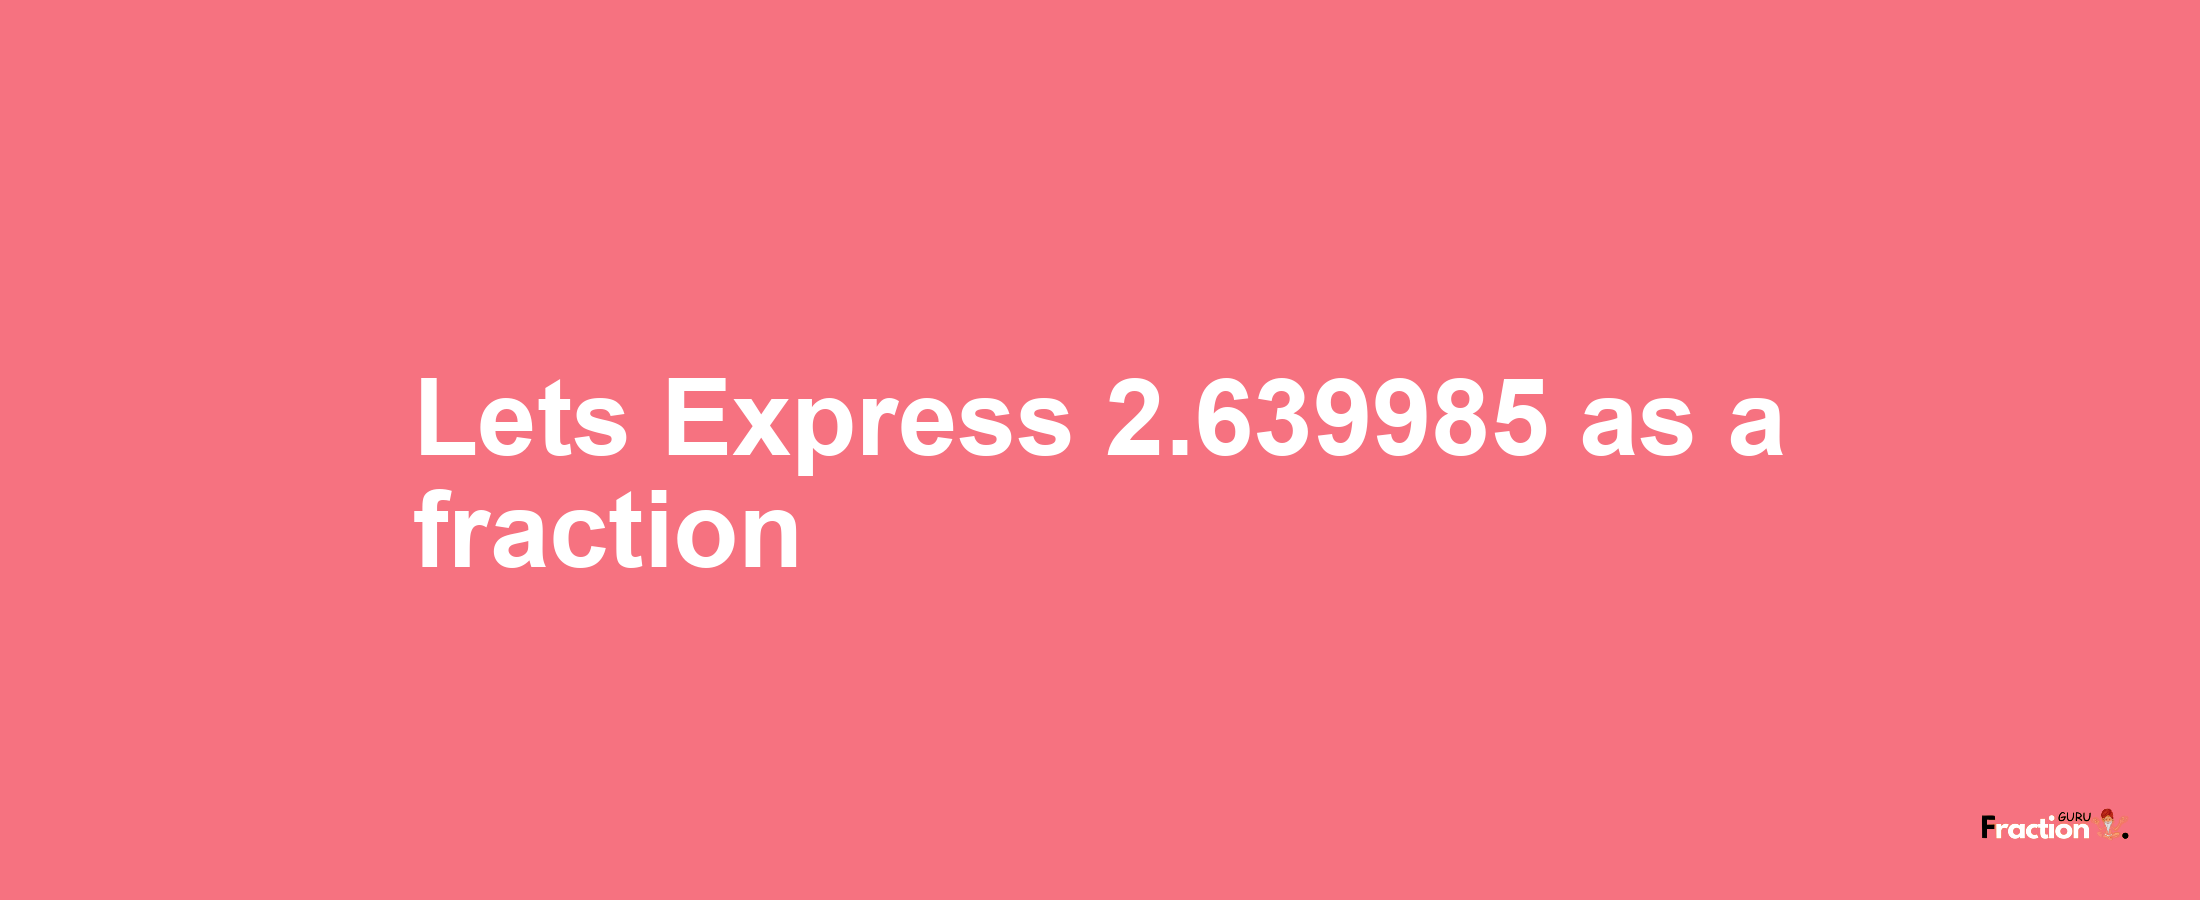 Lets Express 2.639985 as afraction